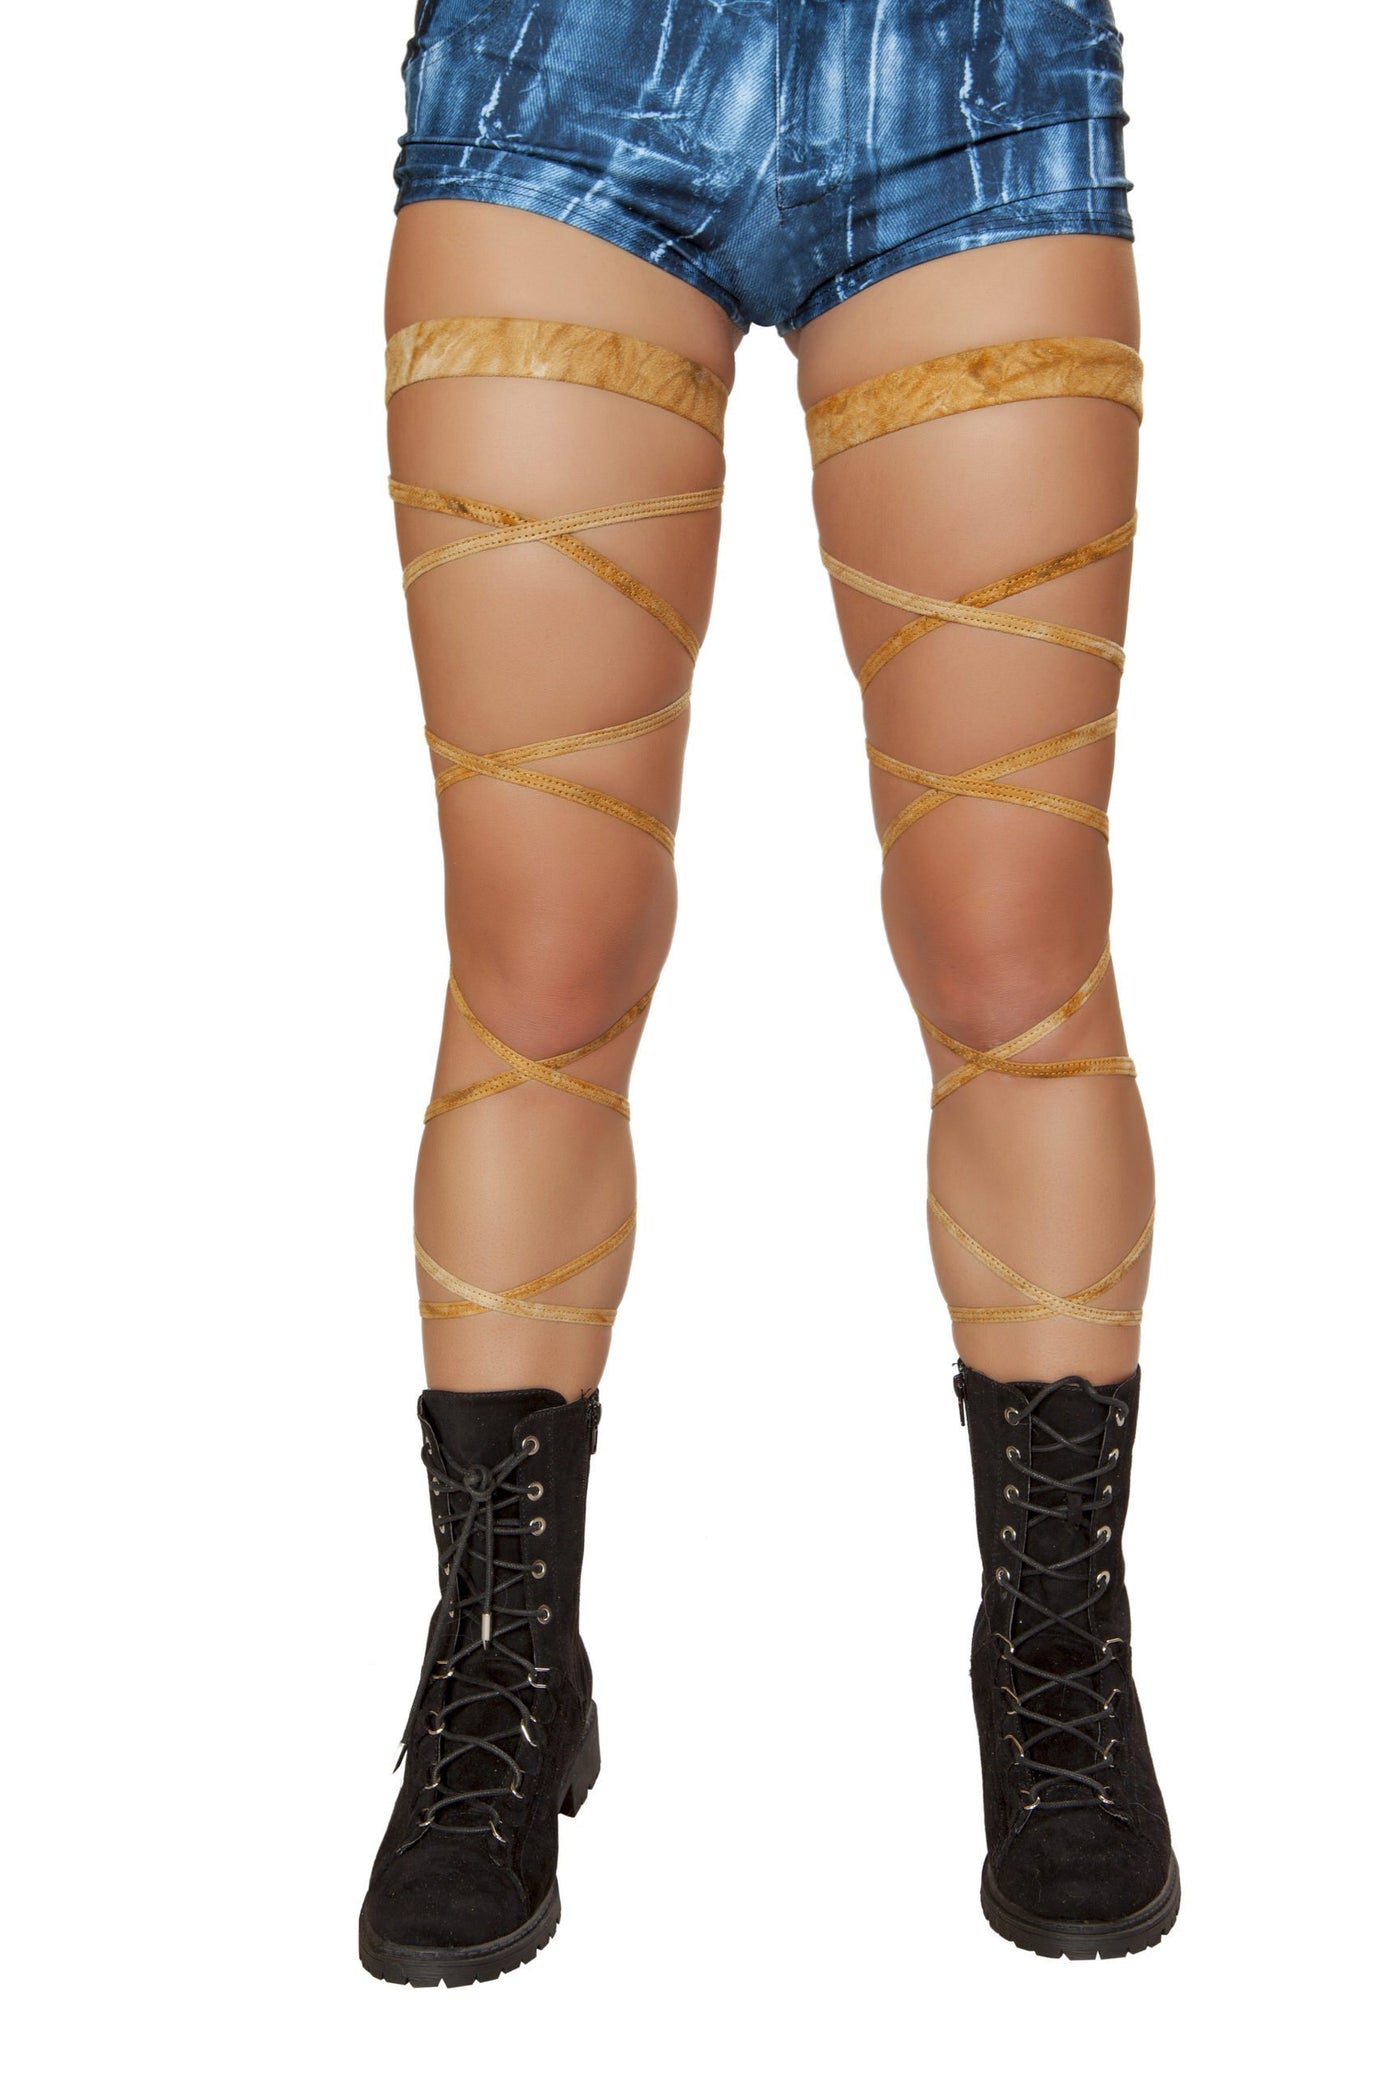 Buy 100" Suede Leg Strap with Attached Garter from RomaRetailShop for 15.90 with Same Day Shipping Designed by Roma Costume 3636-Camel-O/S